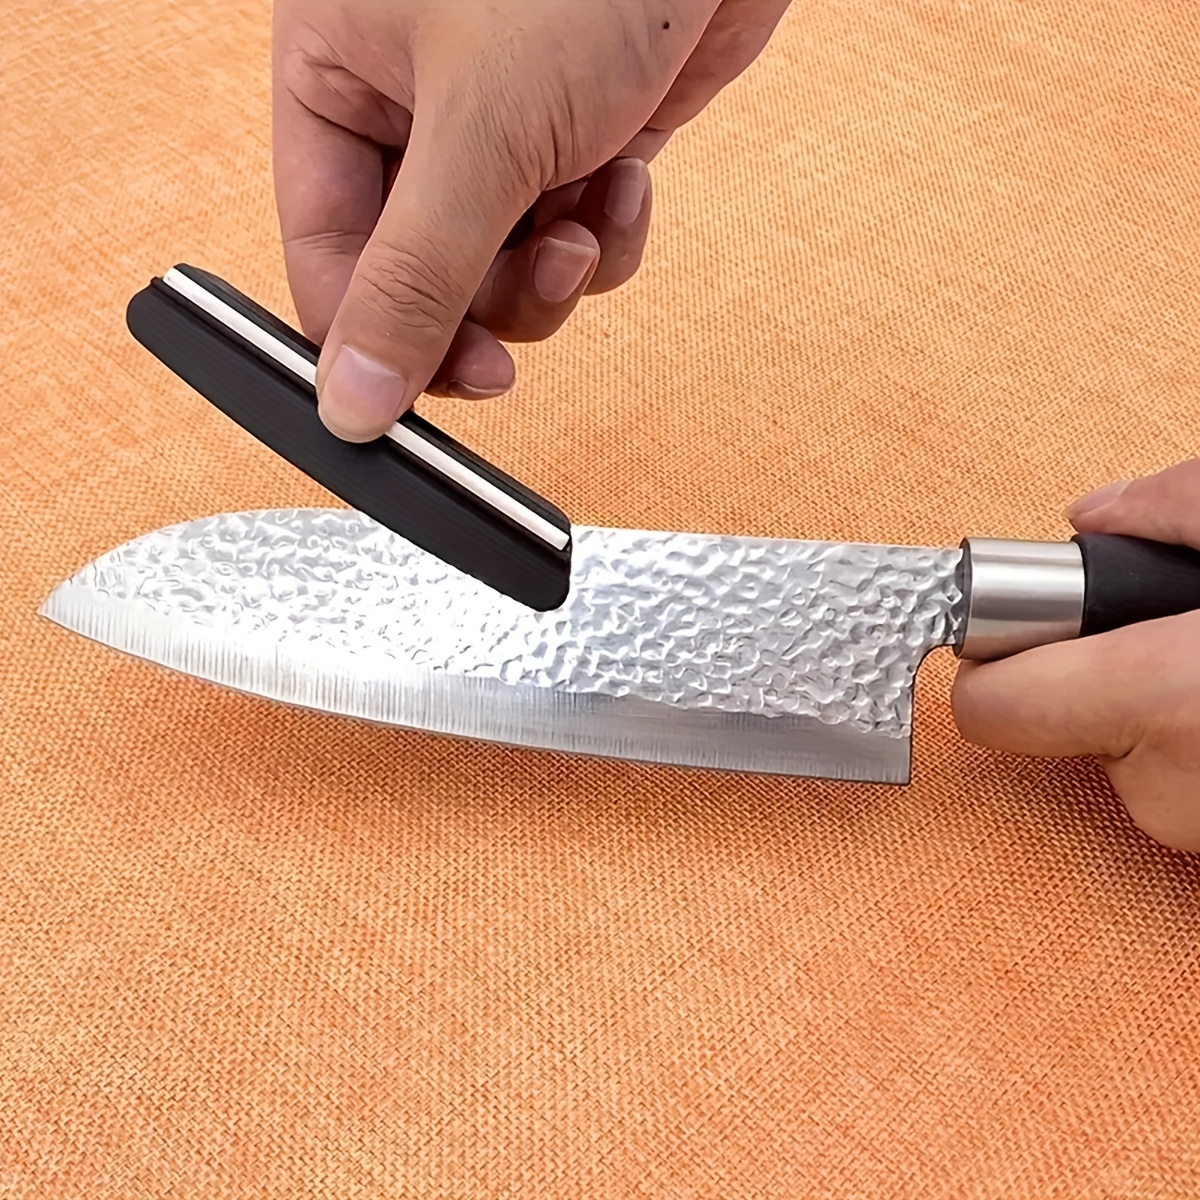 Angle Guide Sharpening Stone Accessories Kitchen Knife Sharper